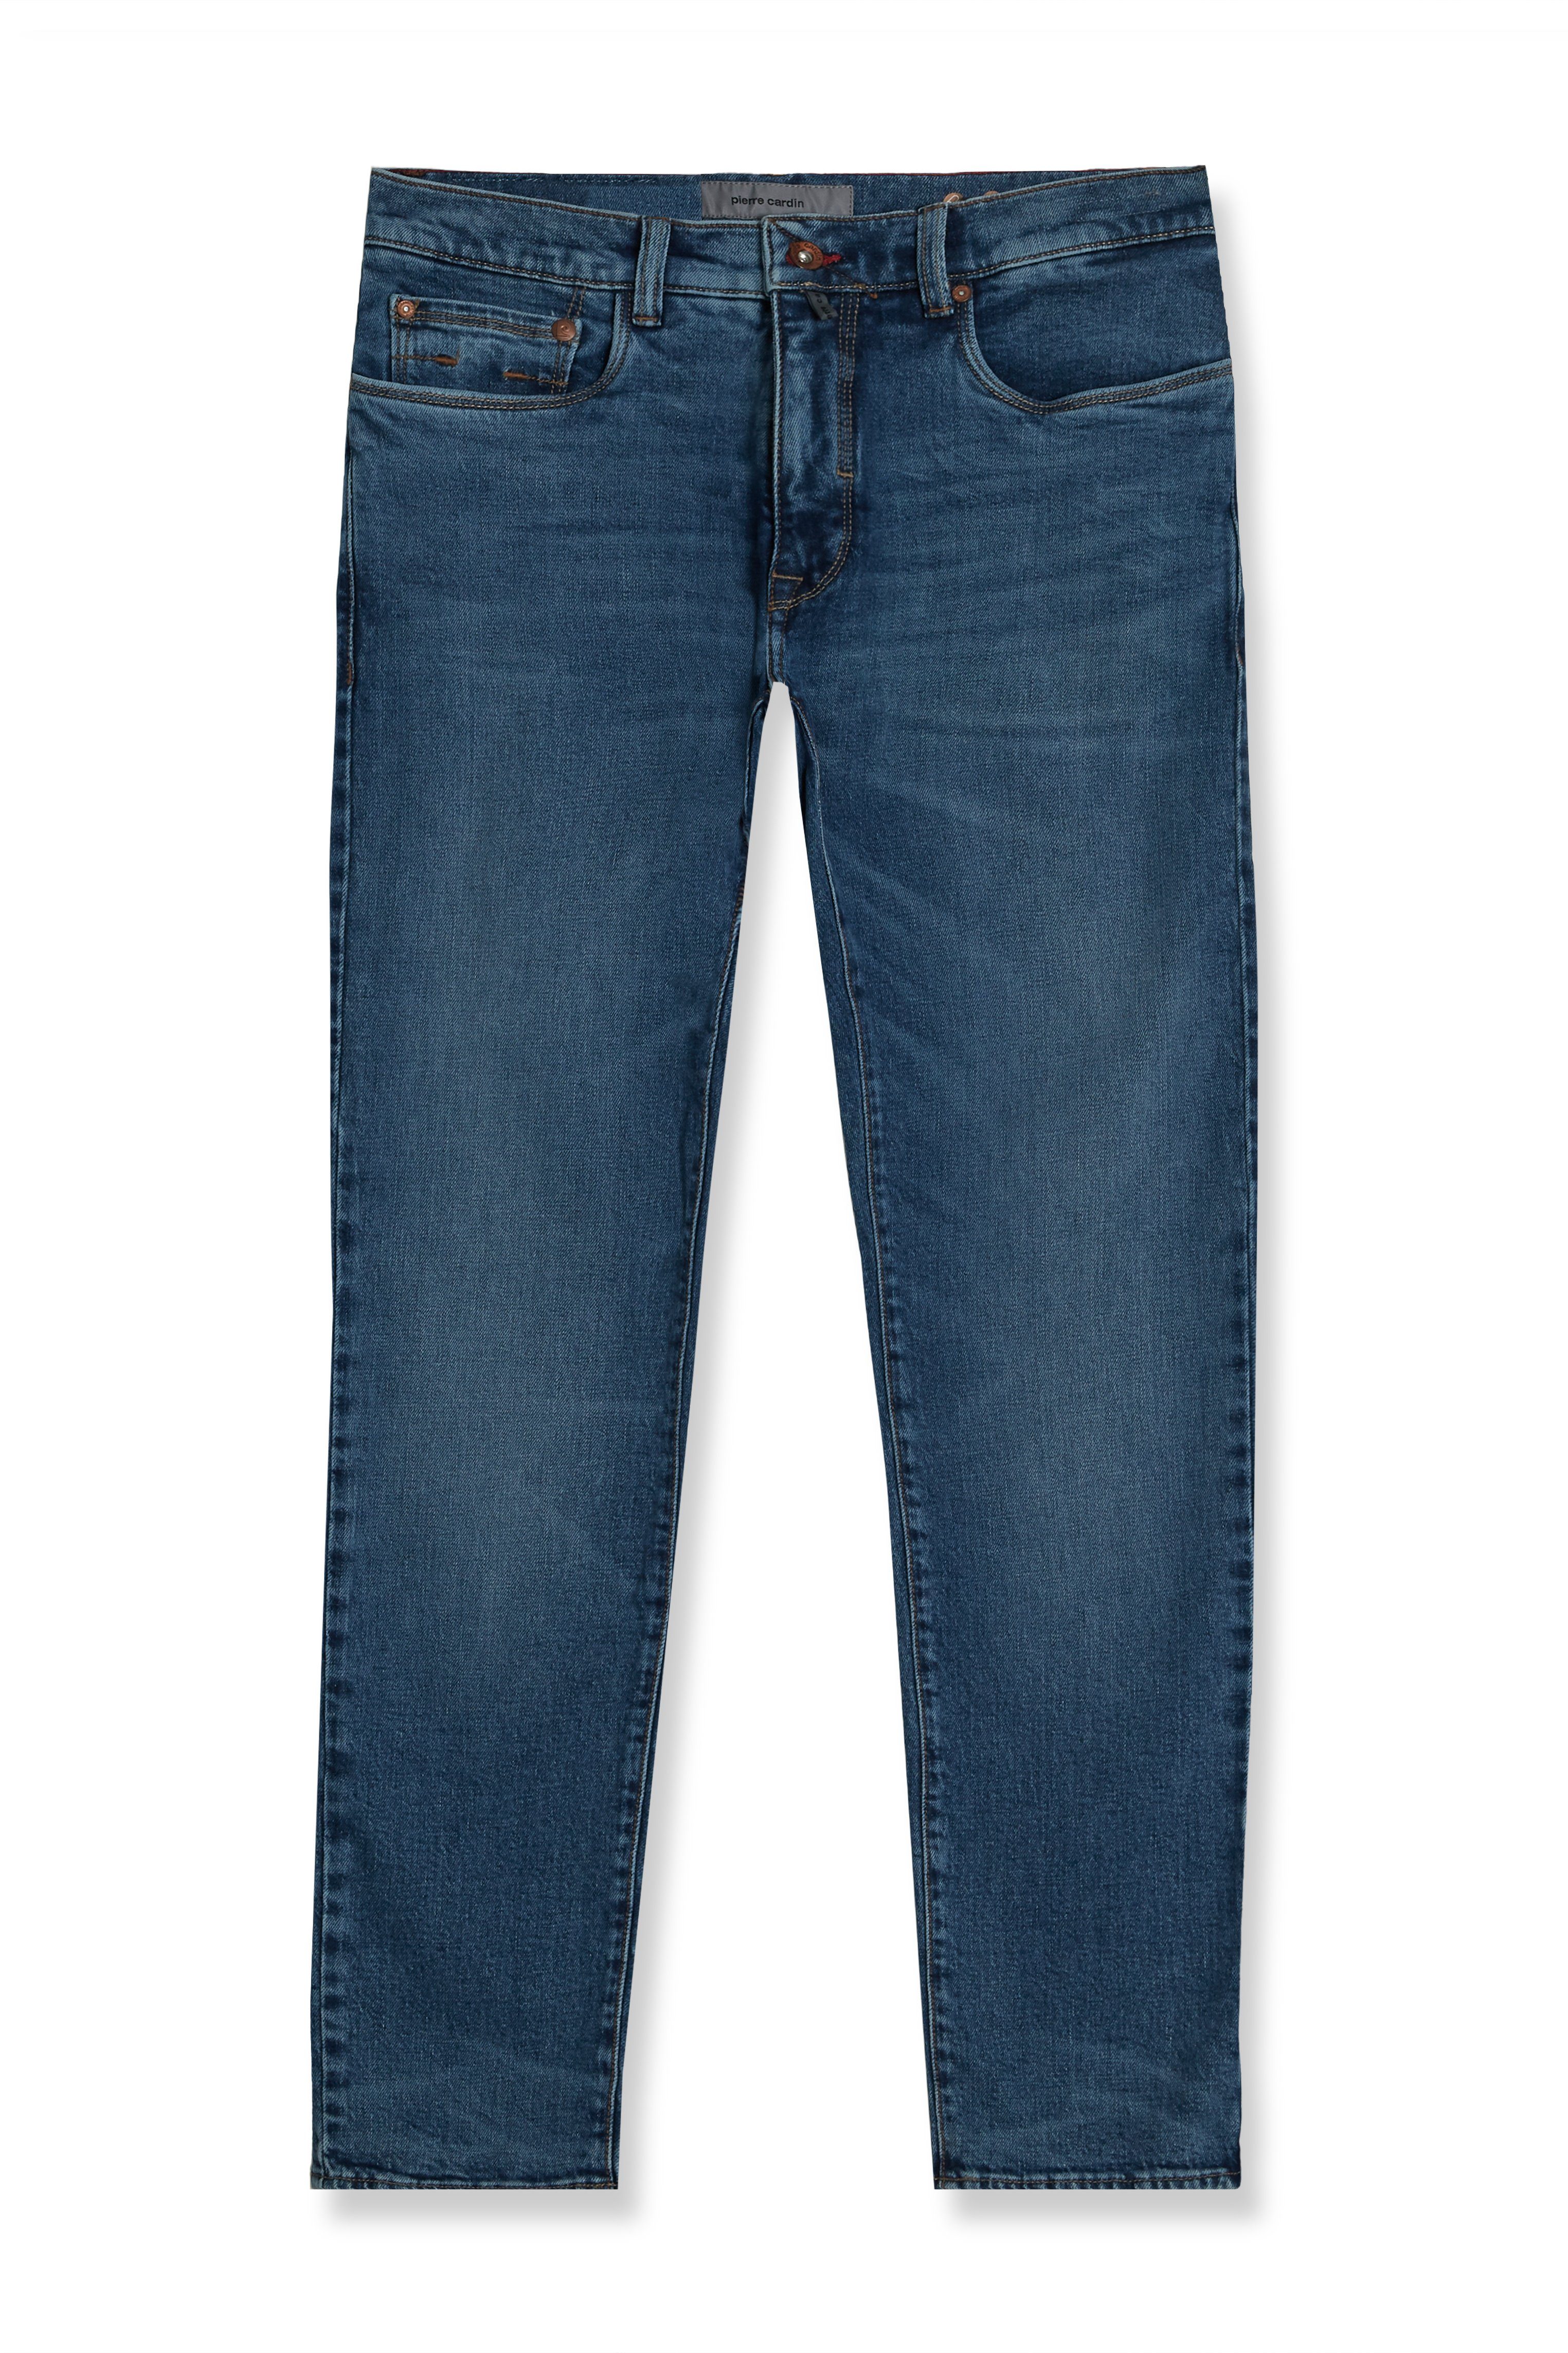 Pierre Cardin Tapered-fit-Jeans Lyon Tapered Less Energy, Less Chemicals, Less Water